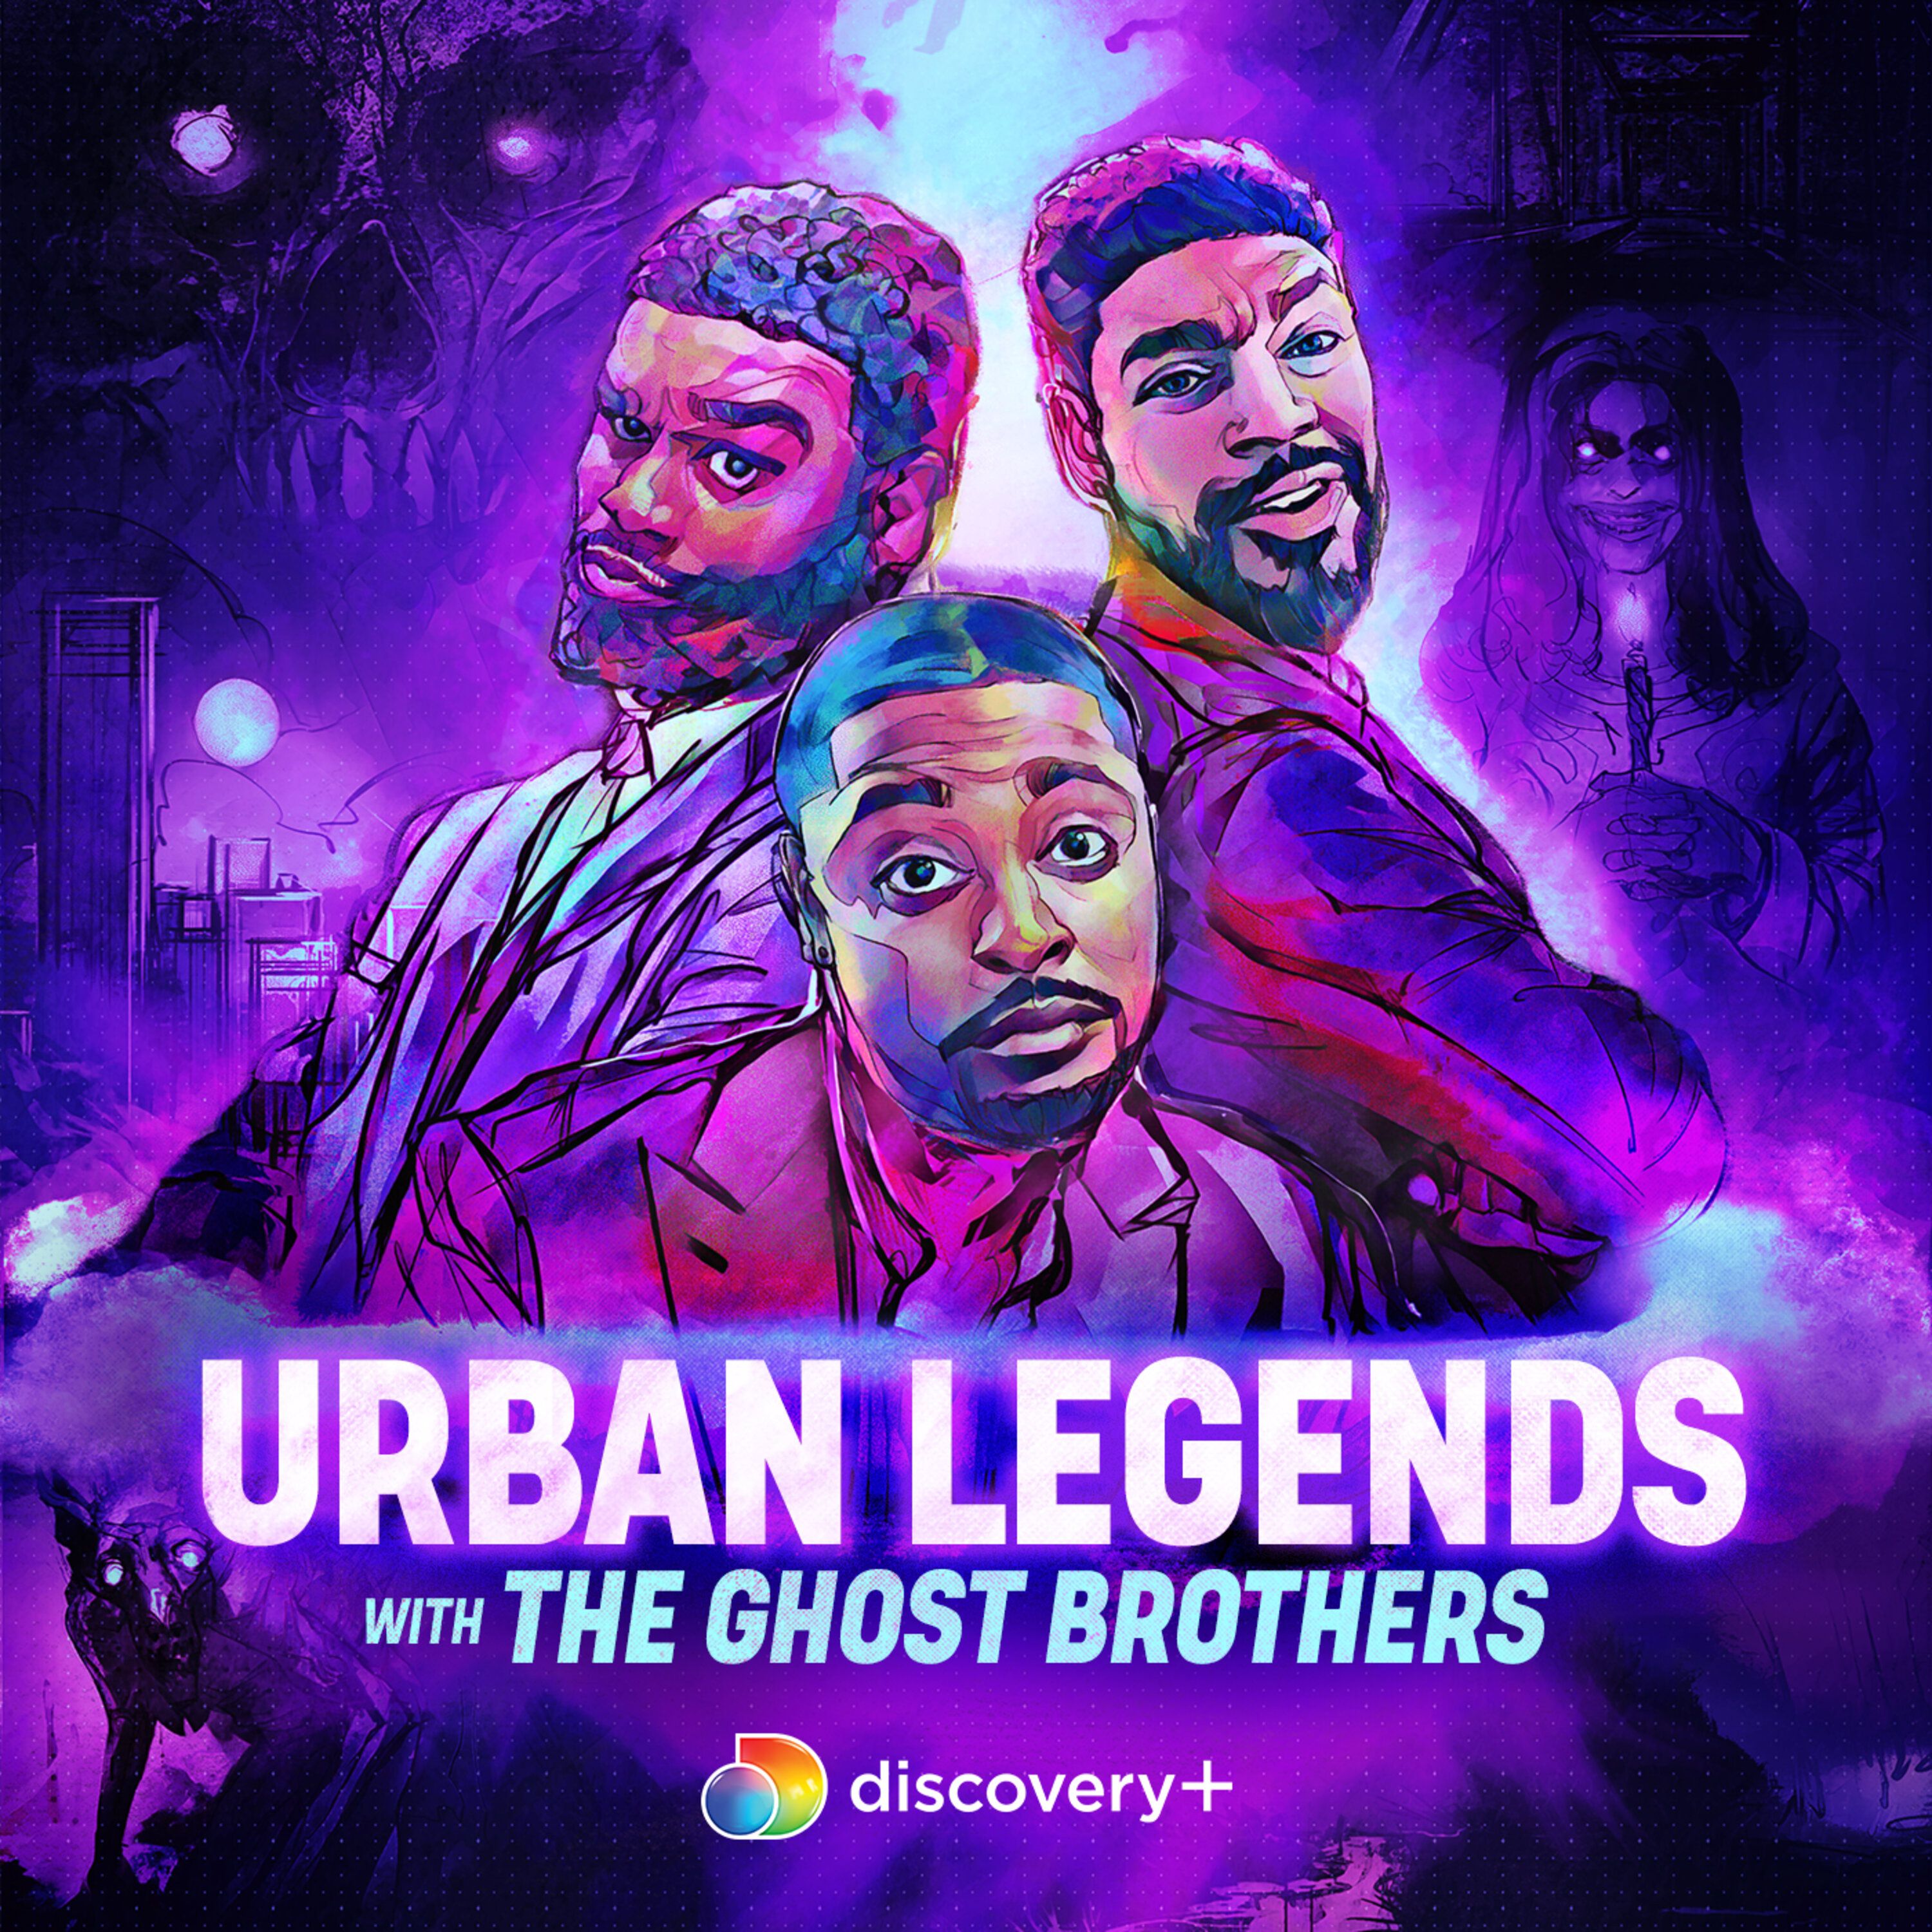 Introducing: Urban Legends with the Ghost Brothers